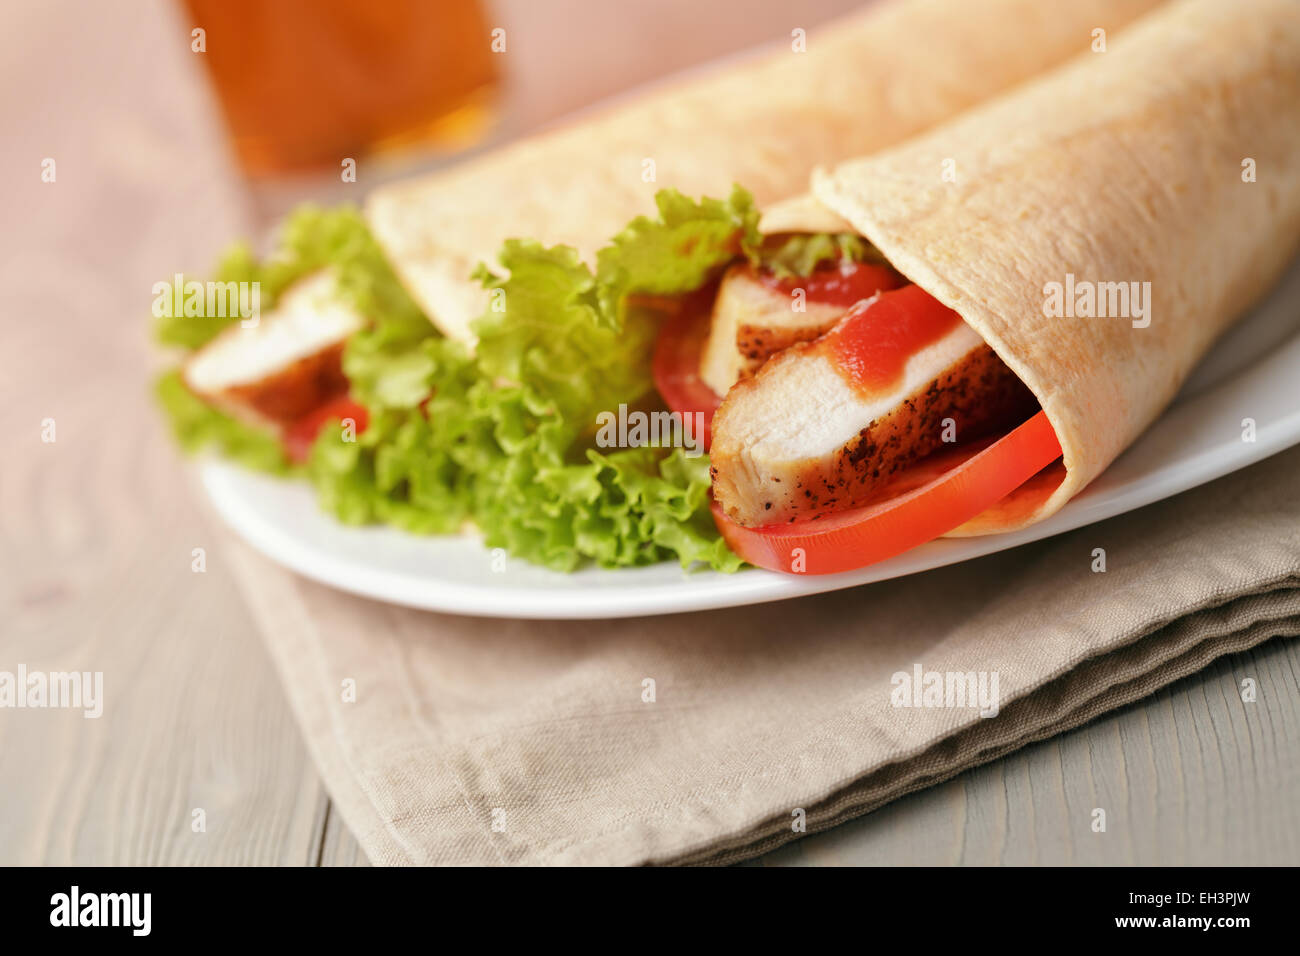 freshly made tortilla wraps with chicken and vegetables Stock Photo